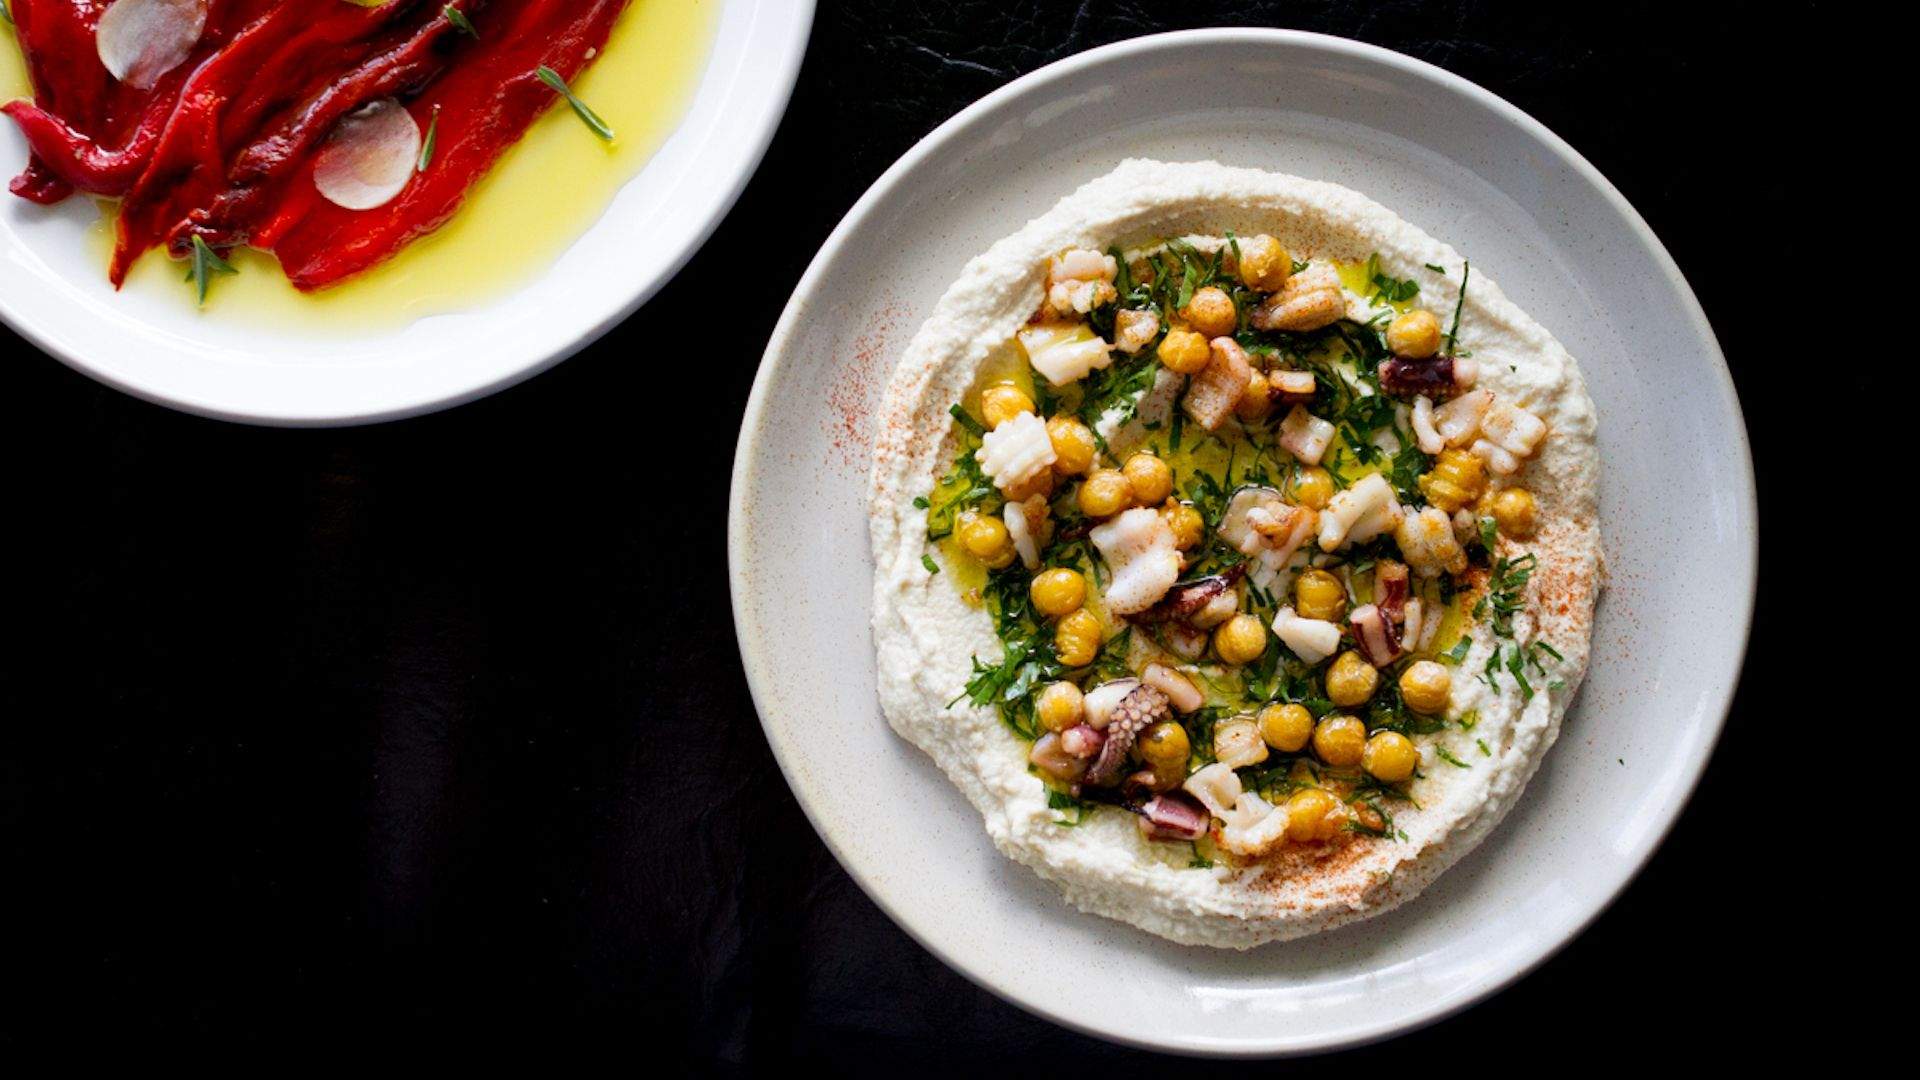 Bar Saracen Is Selling Tubs of Its Signature Hummus to Raise Relief Funds for Beirut